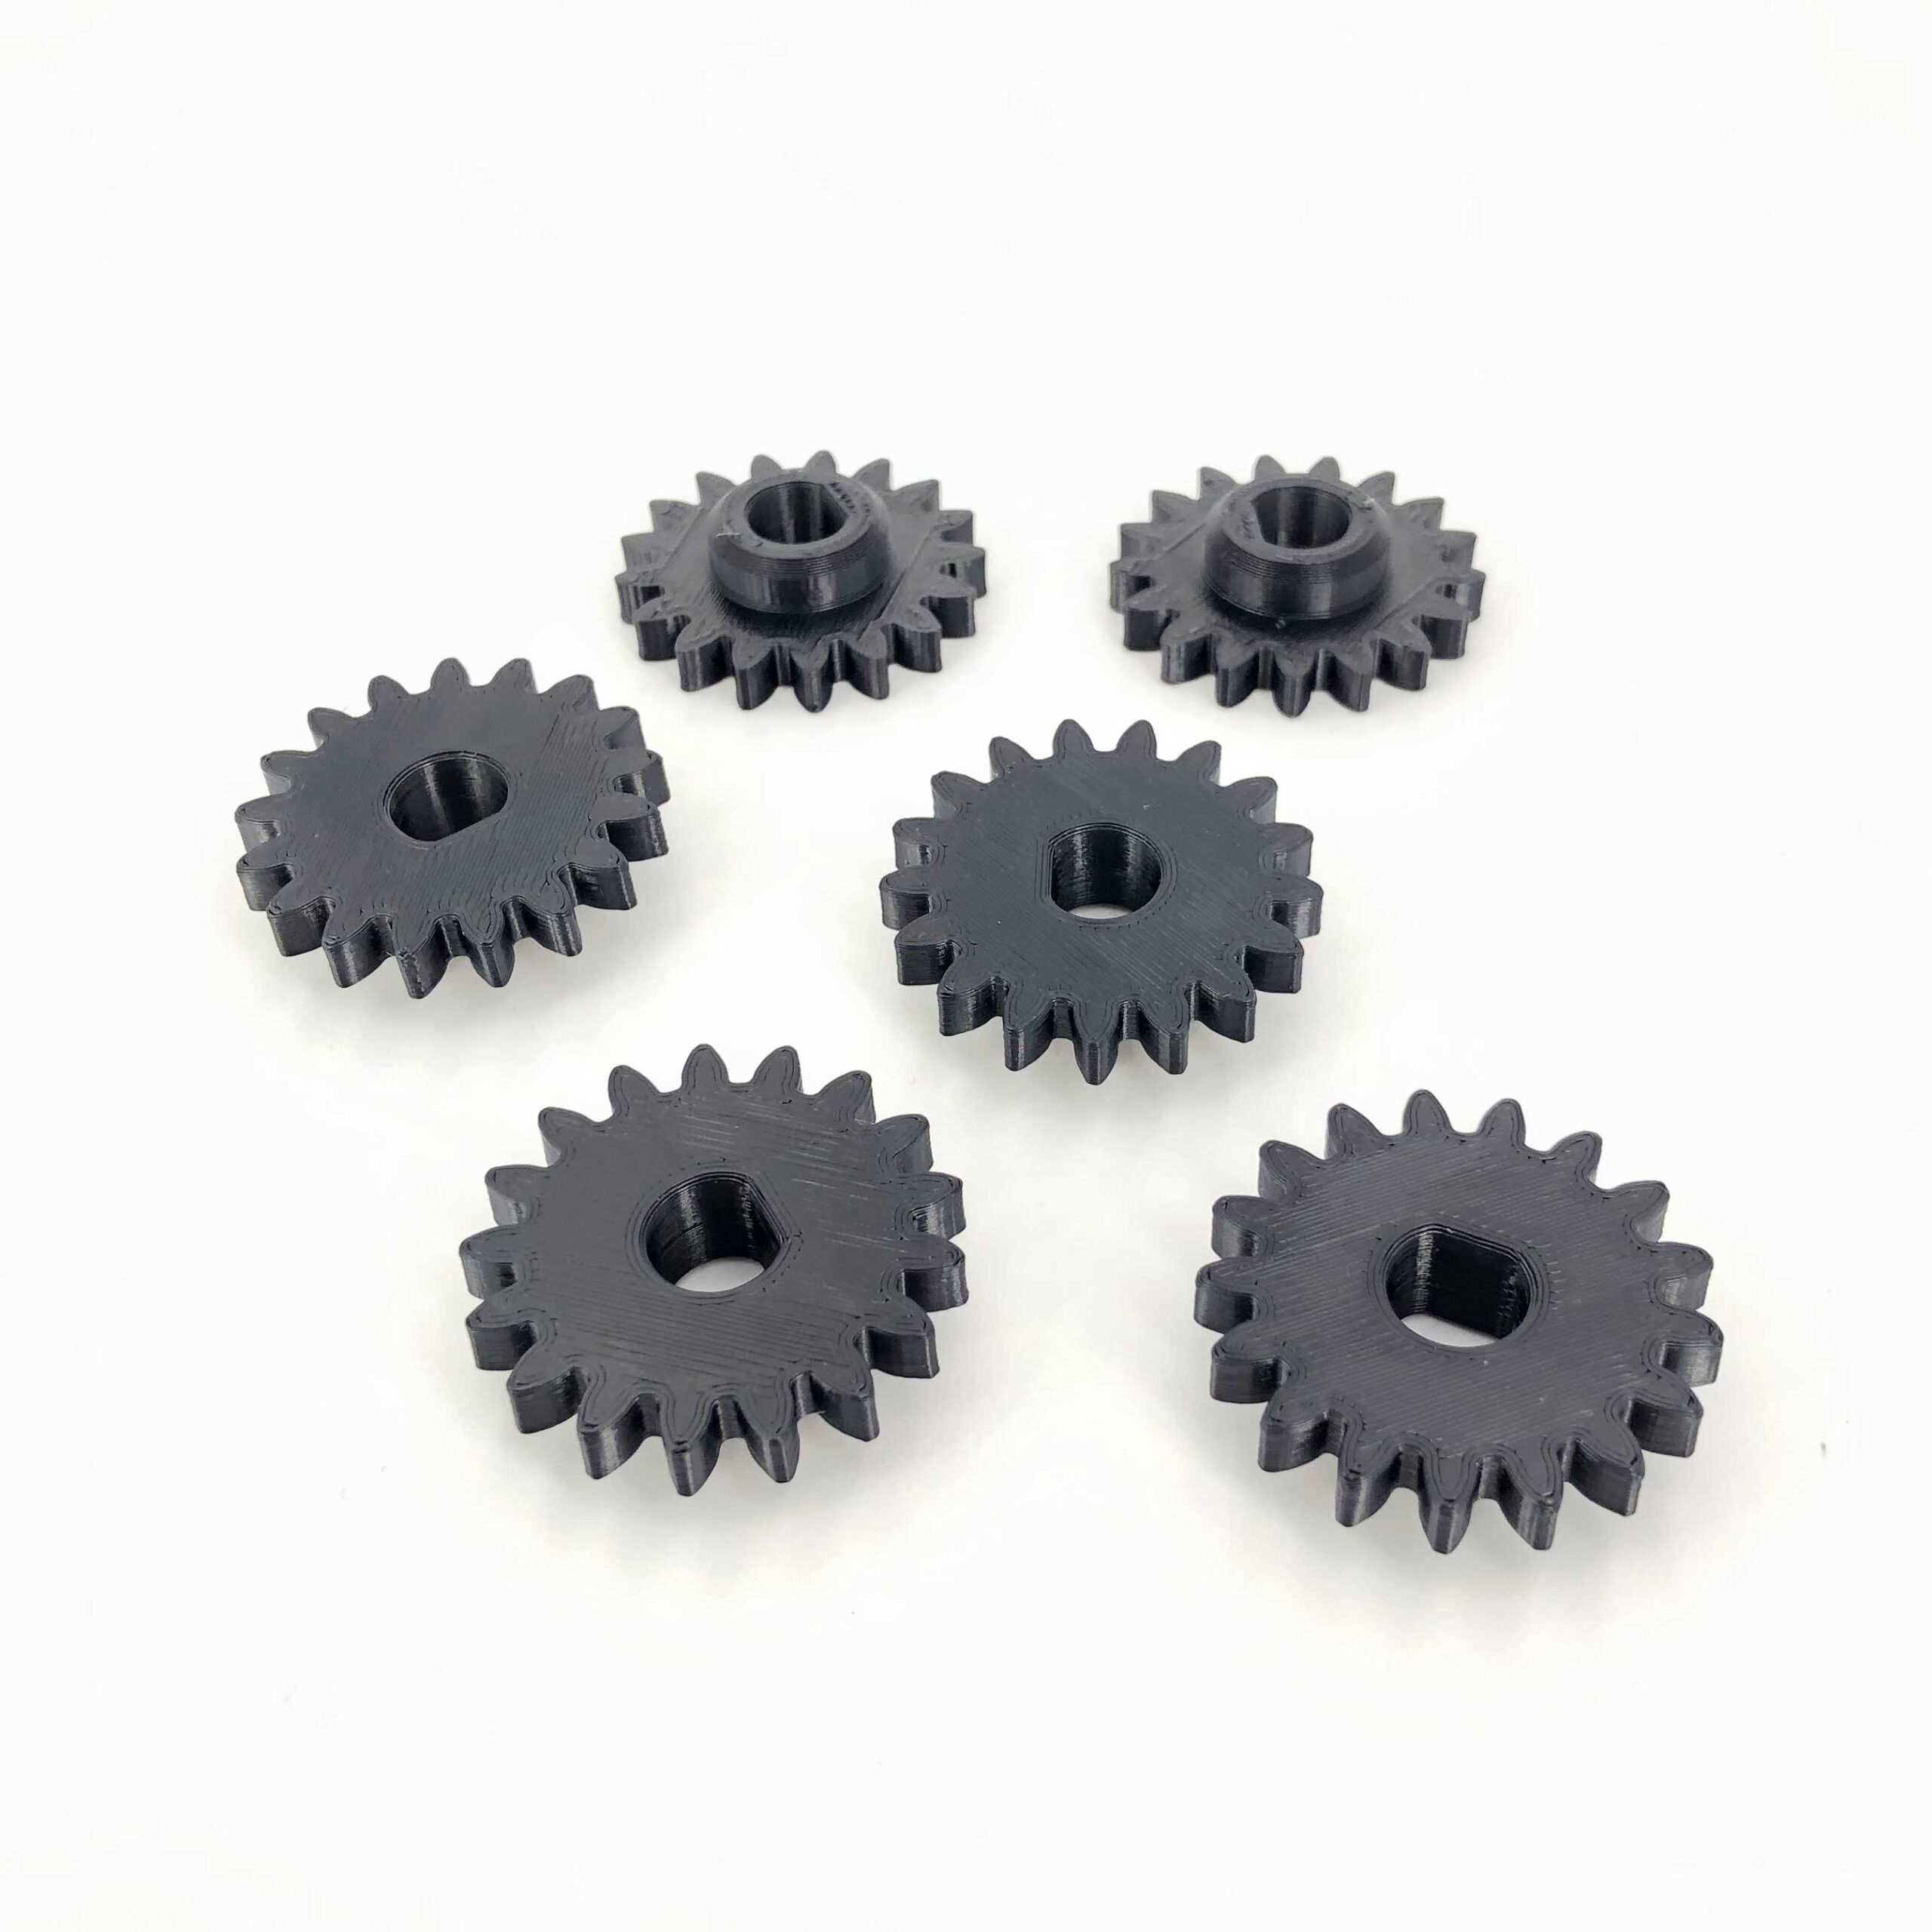 3D printed mechanical gear made of ABS filament in black by a 3D printing service in Sweden